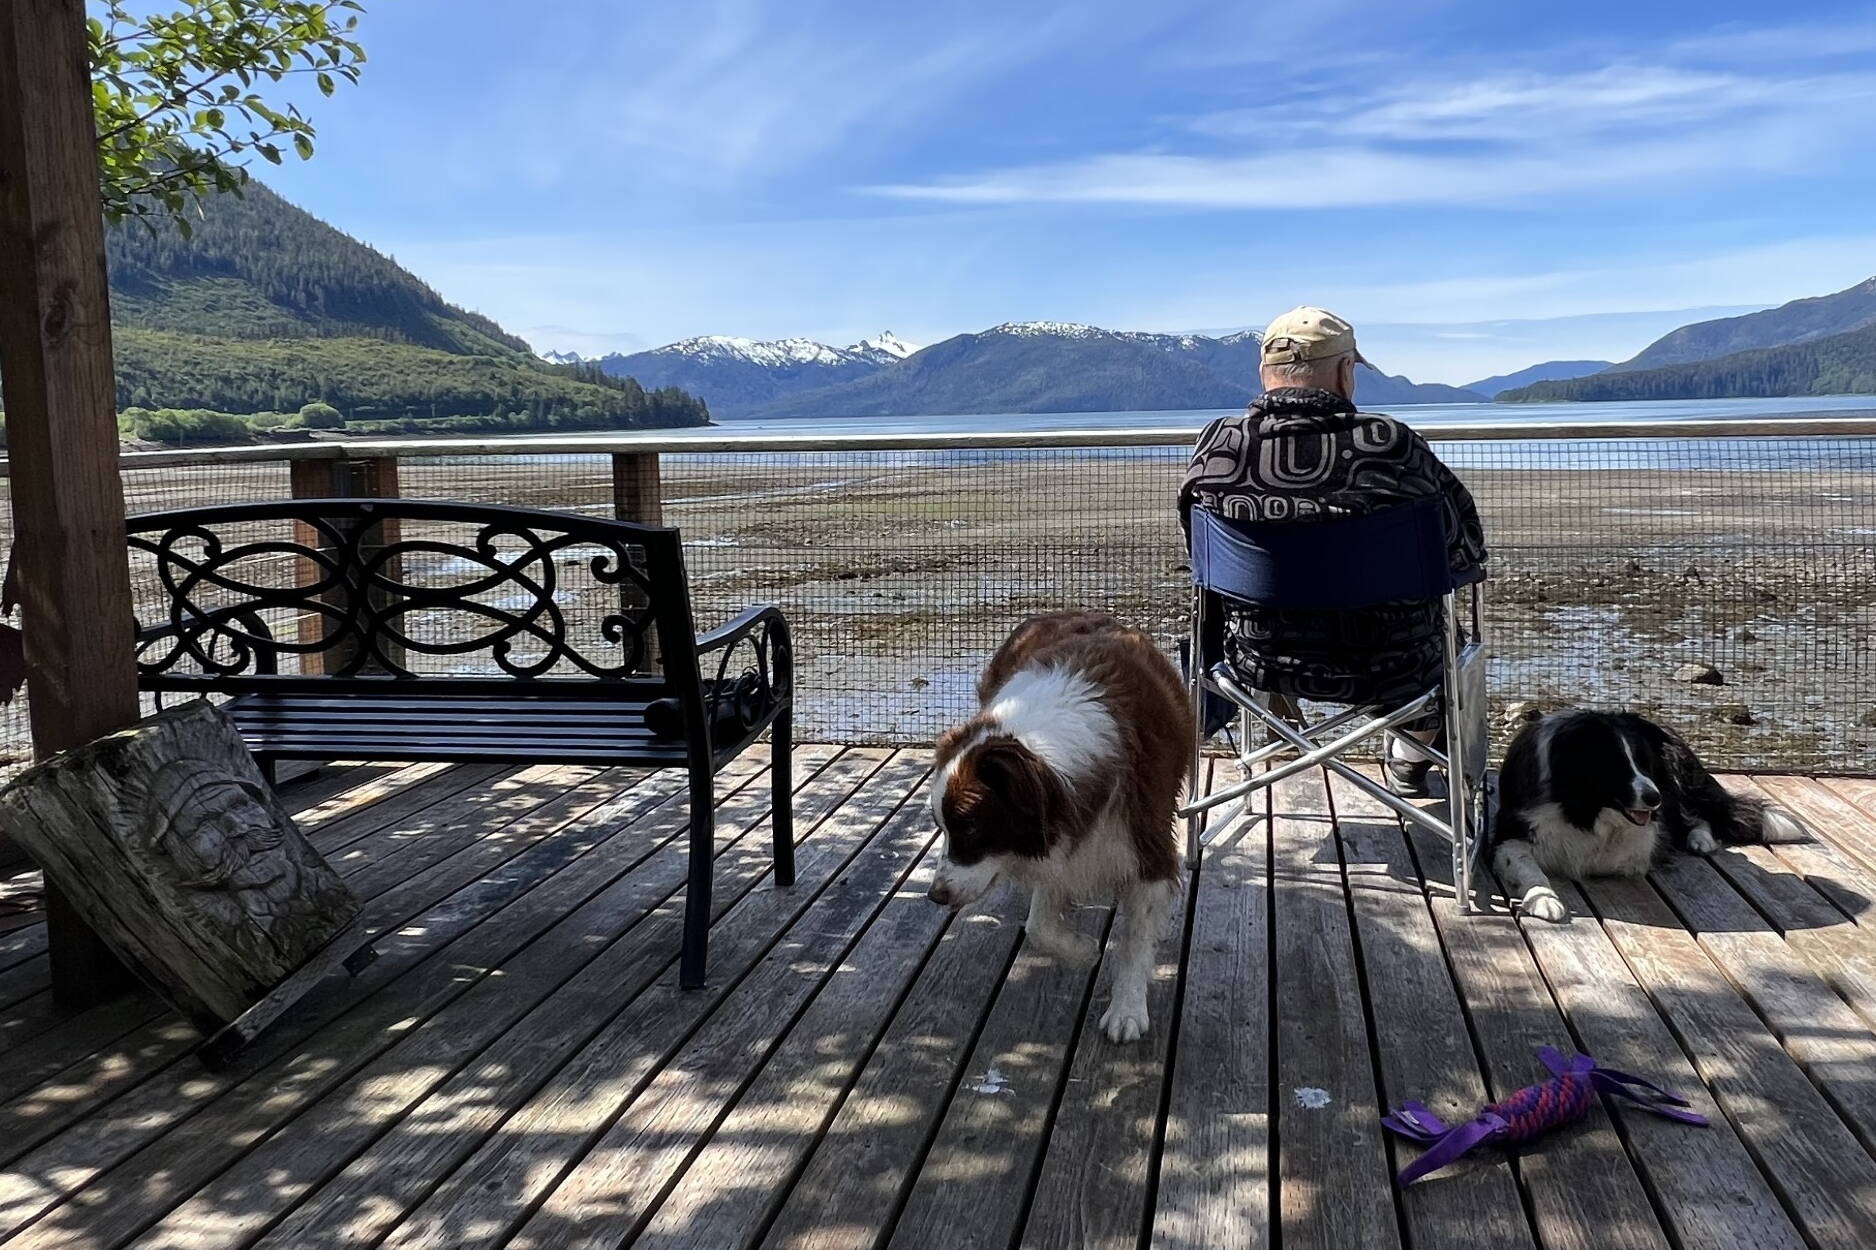 Mickey Prescott and dogs watch for fish jumps in Wrangell. (Photo by Vivian Faith Prescott)